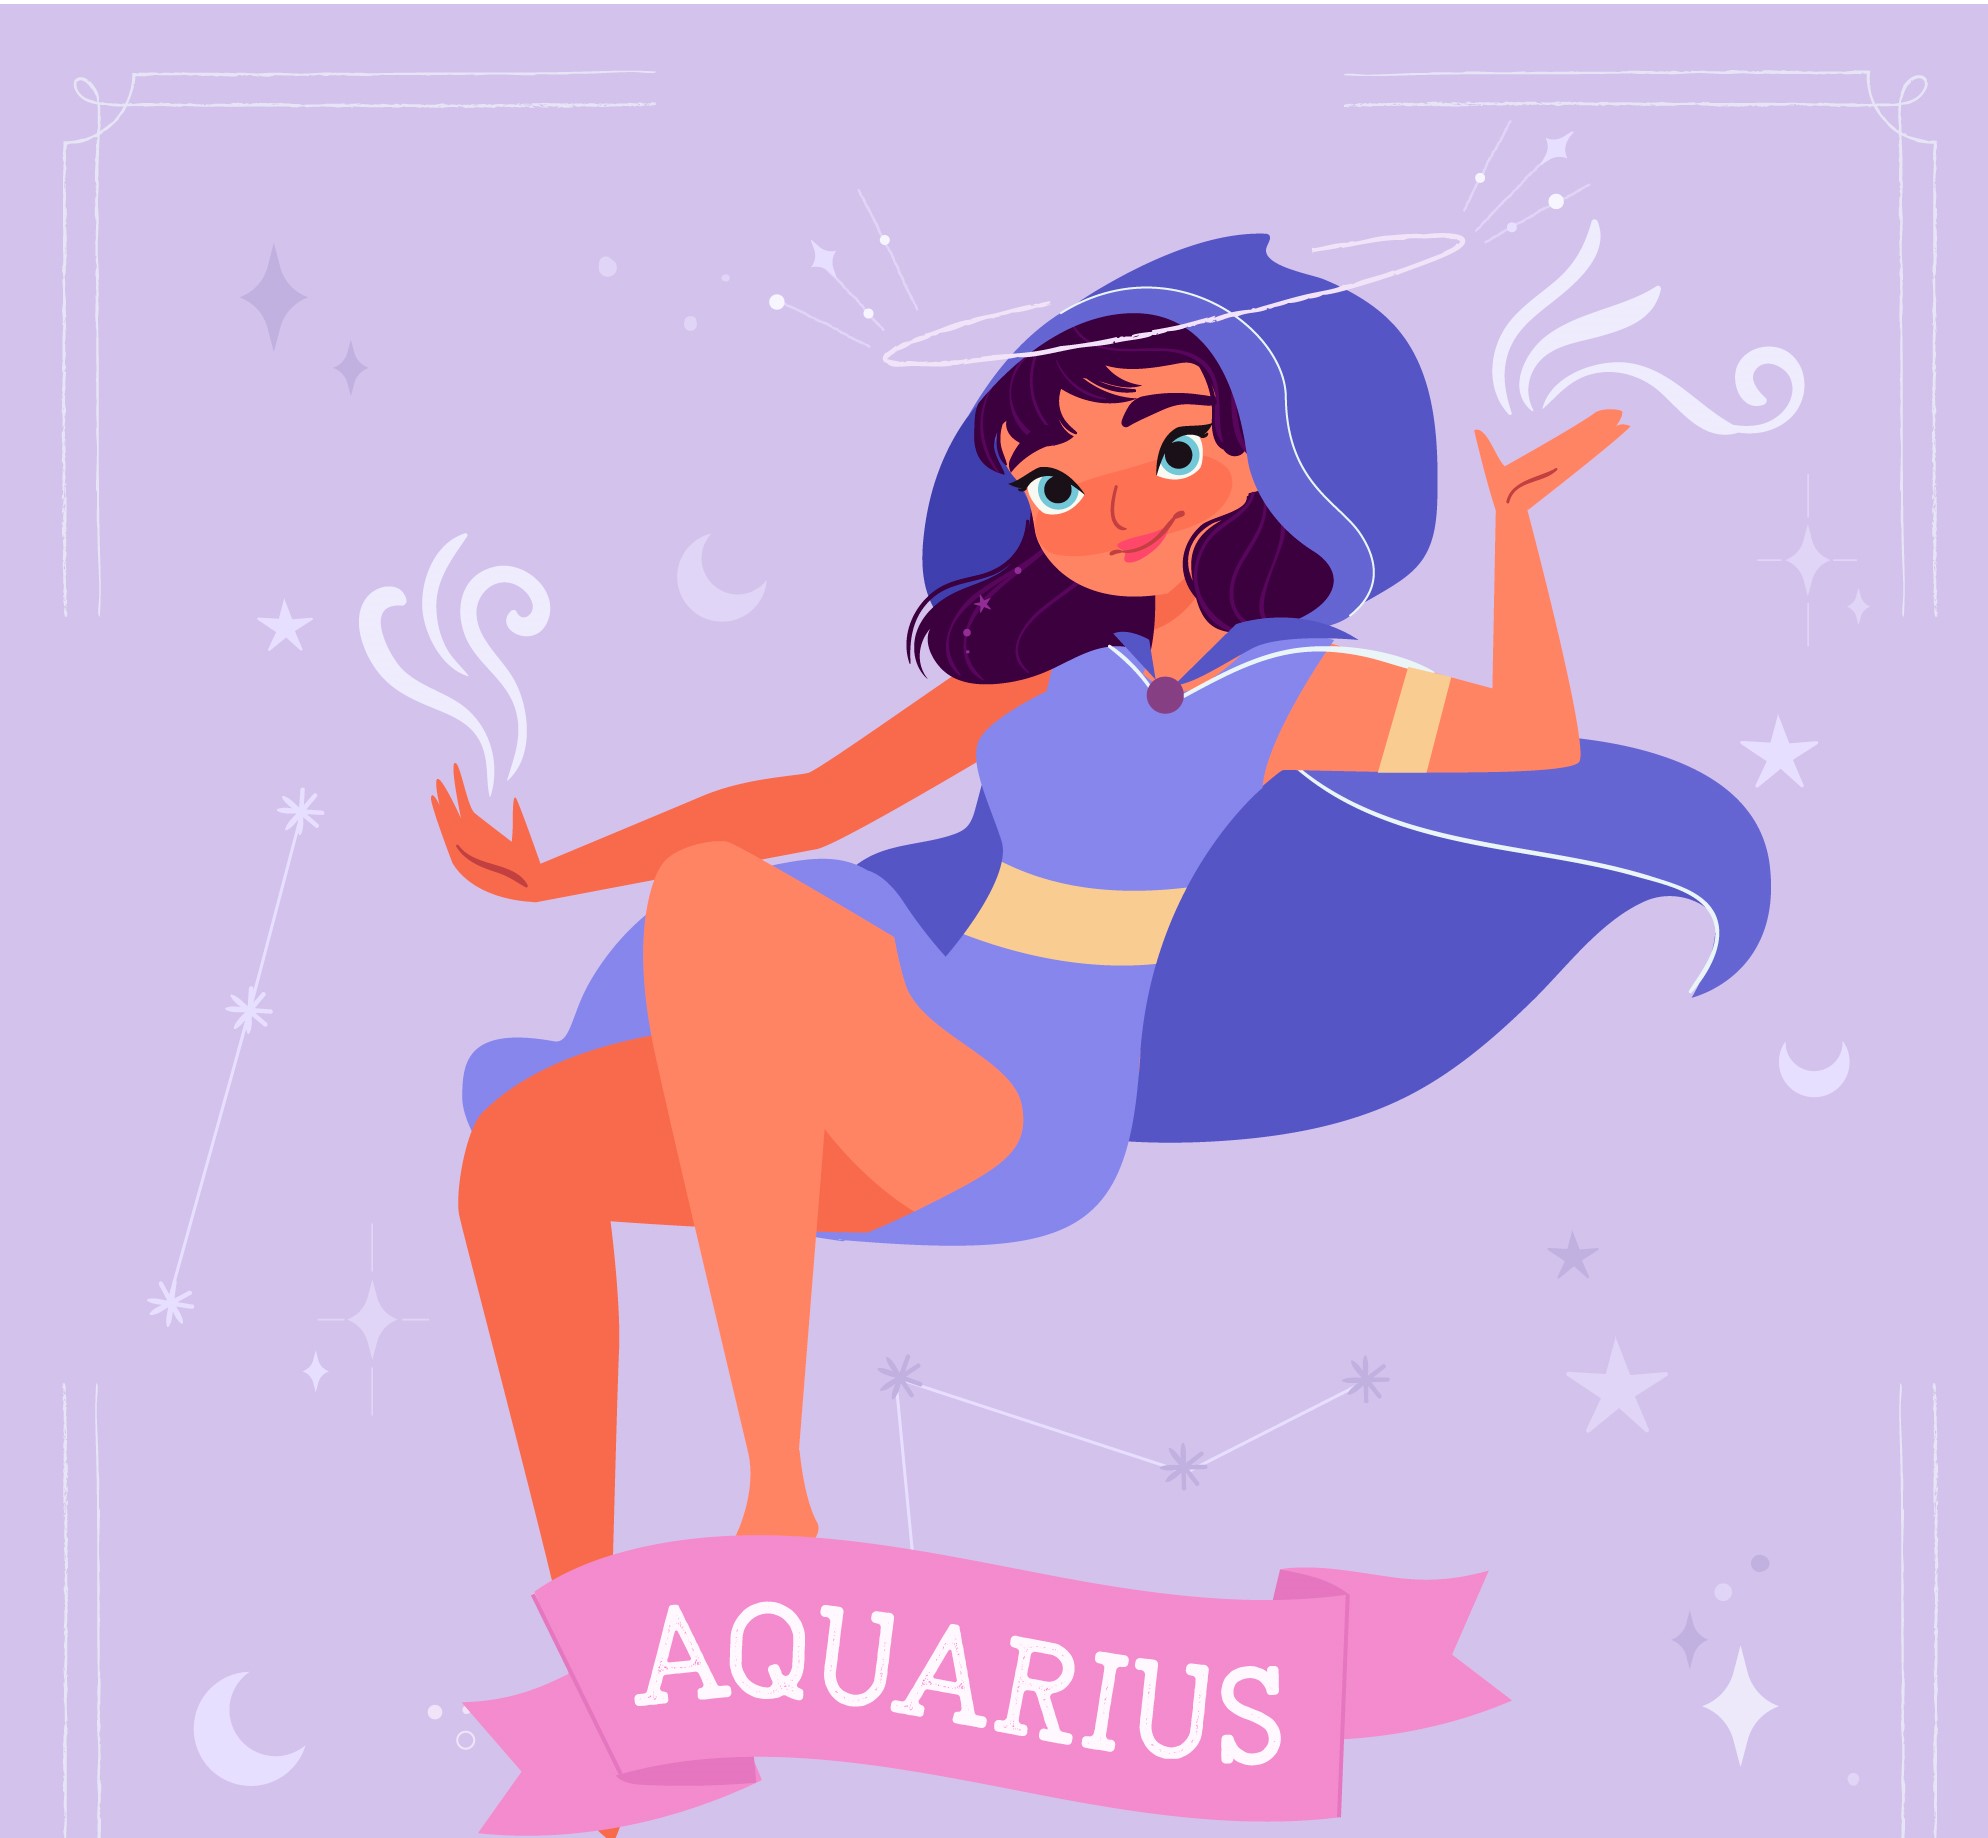 Aquarius Horoscope 2023 - A Year Of Personal Growth And Fulfillment